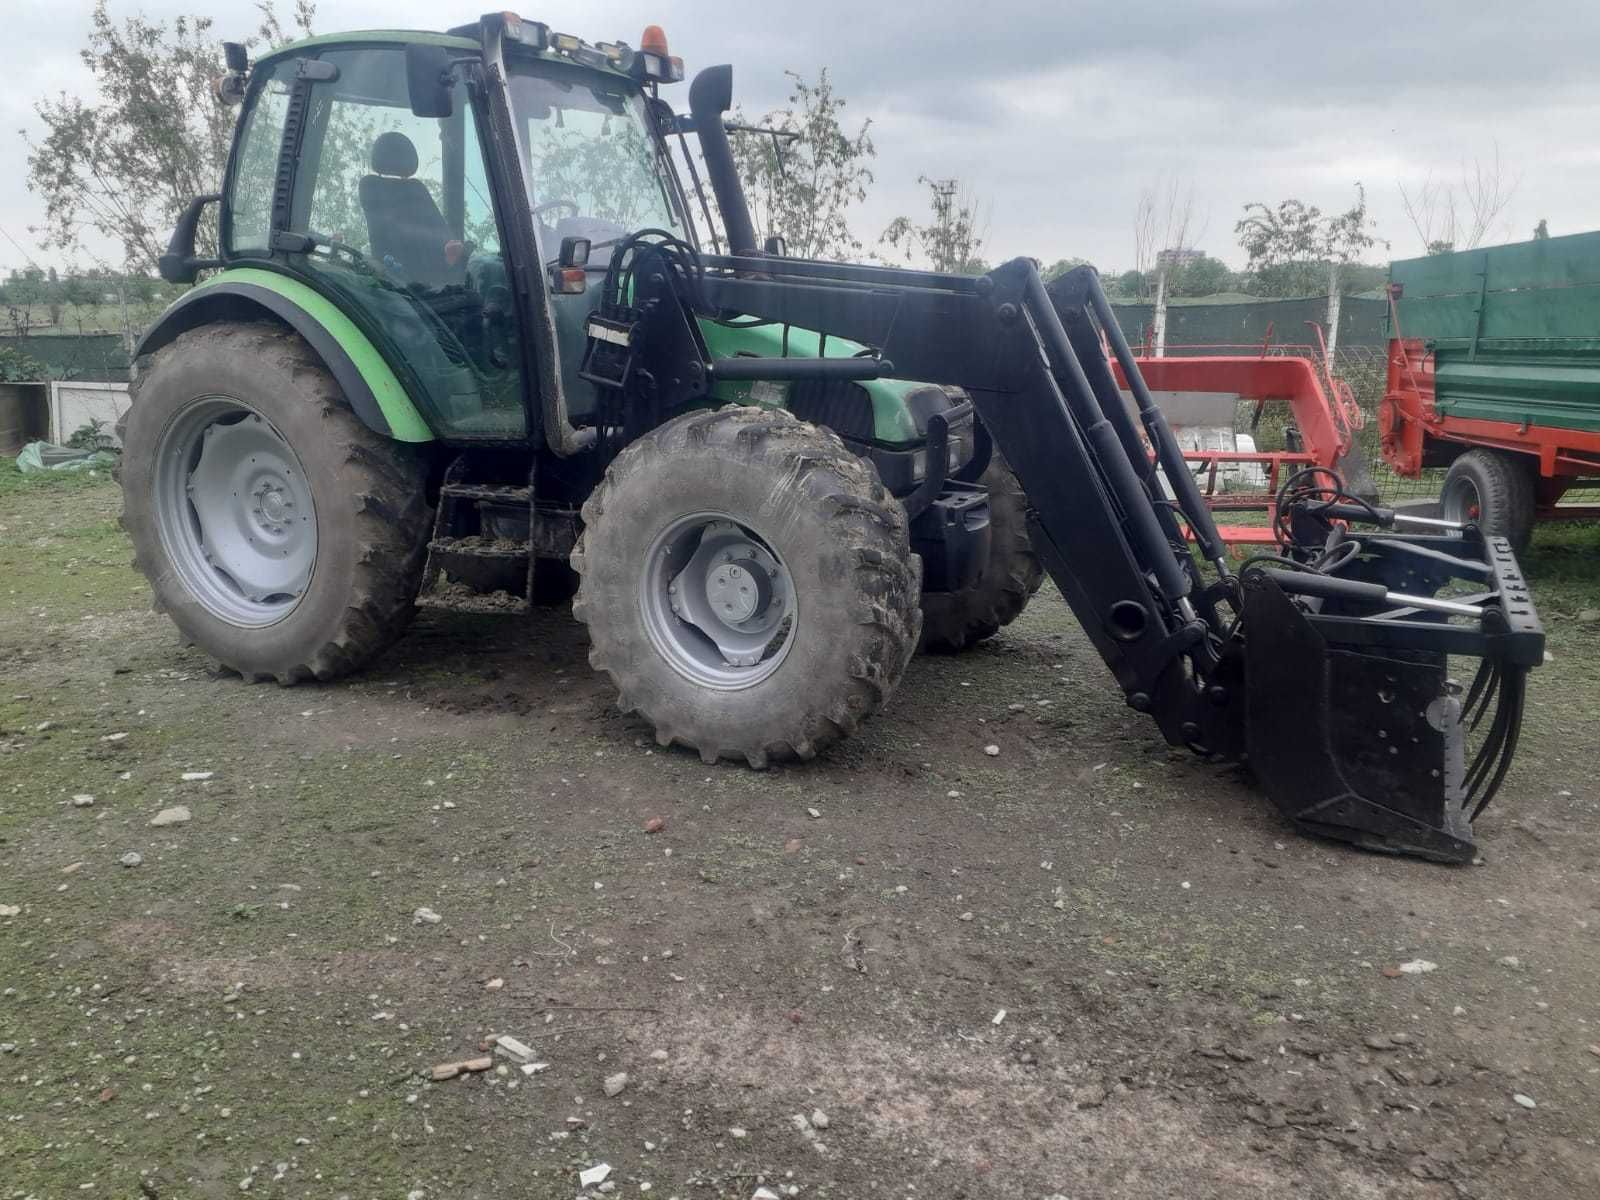 Vand tractor cu incarcator frontal si multiple agregate agricole